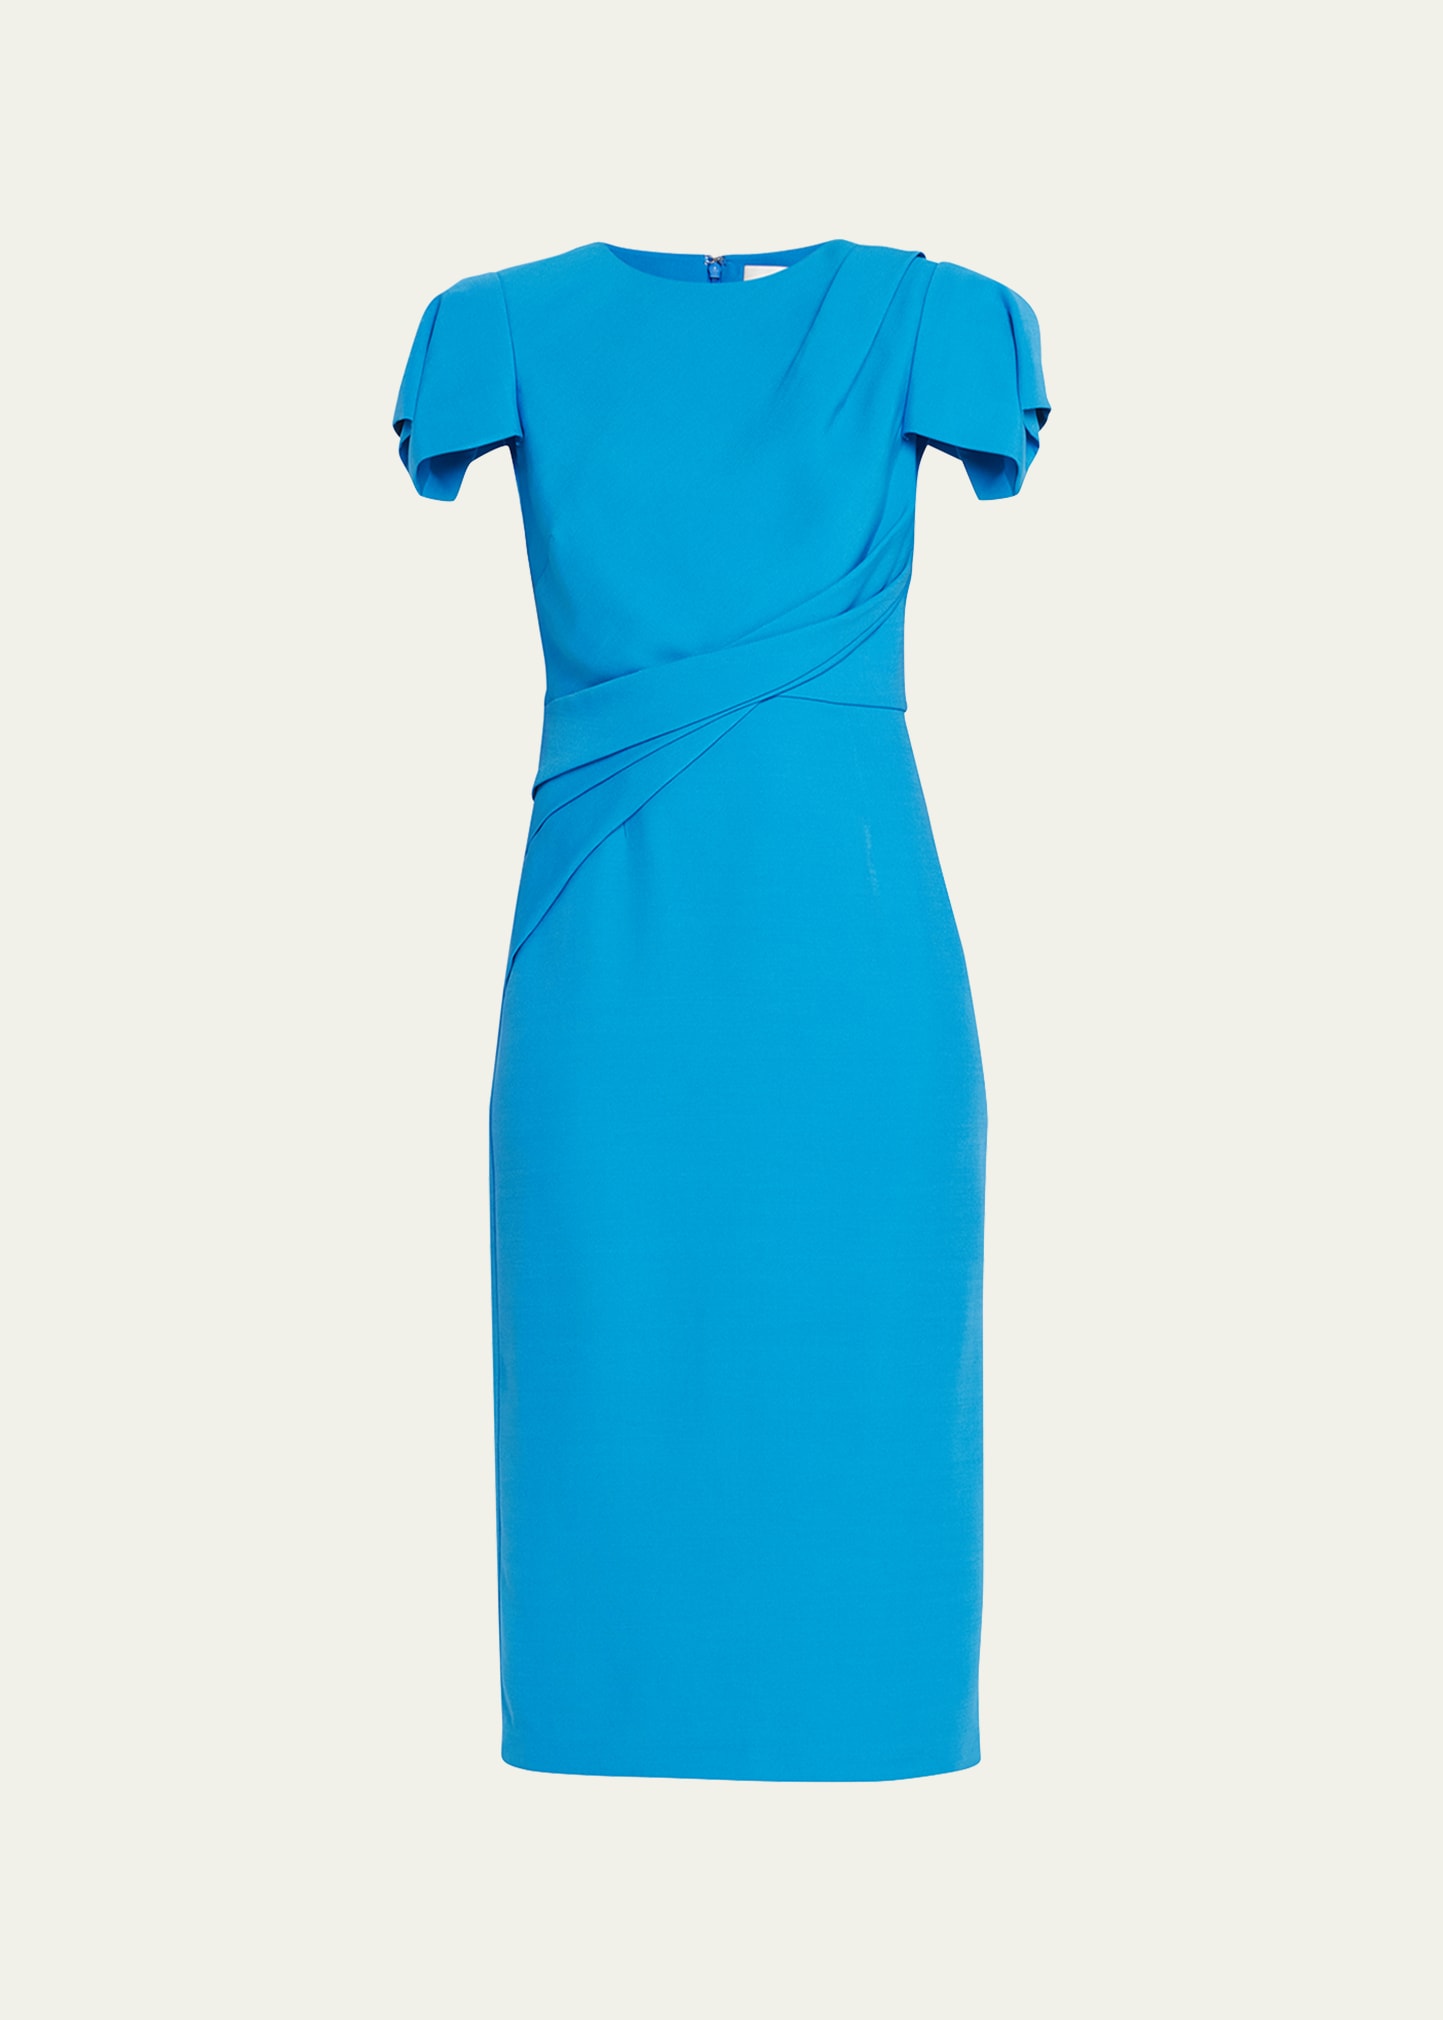 ROLAND MOURET CAP-SLEEVE WOOL-BLEND MIDI DRESS WITH GATHERED FRONT